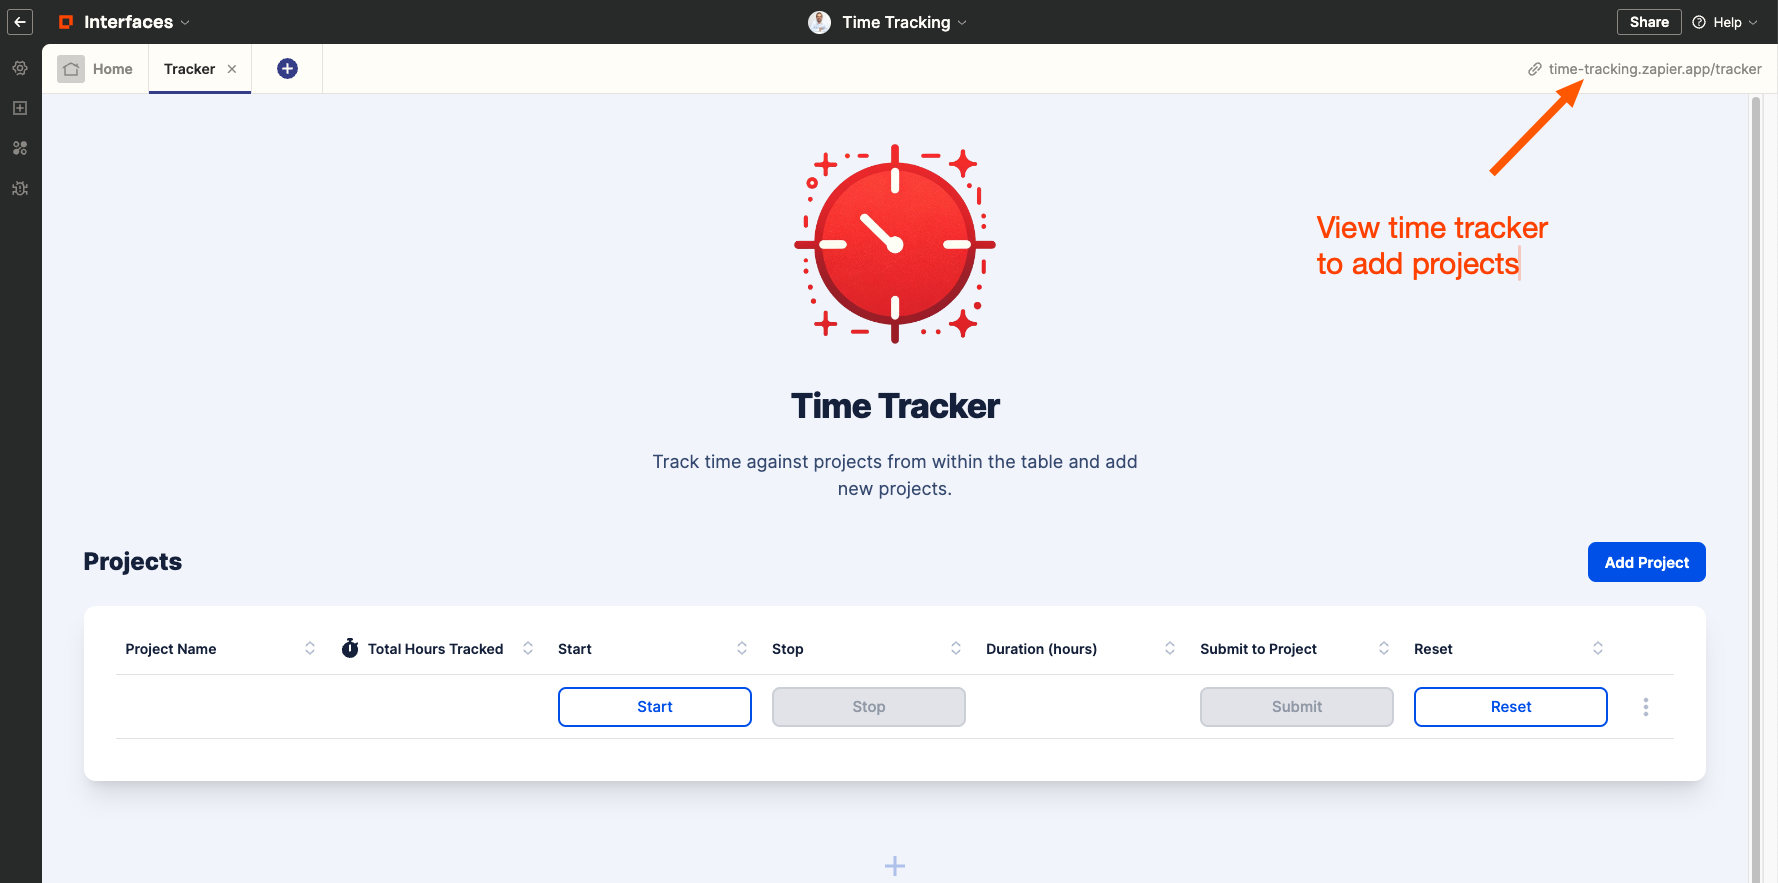 View time tracker in Interfaces